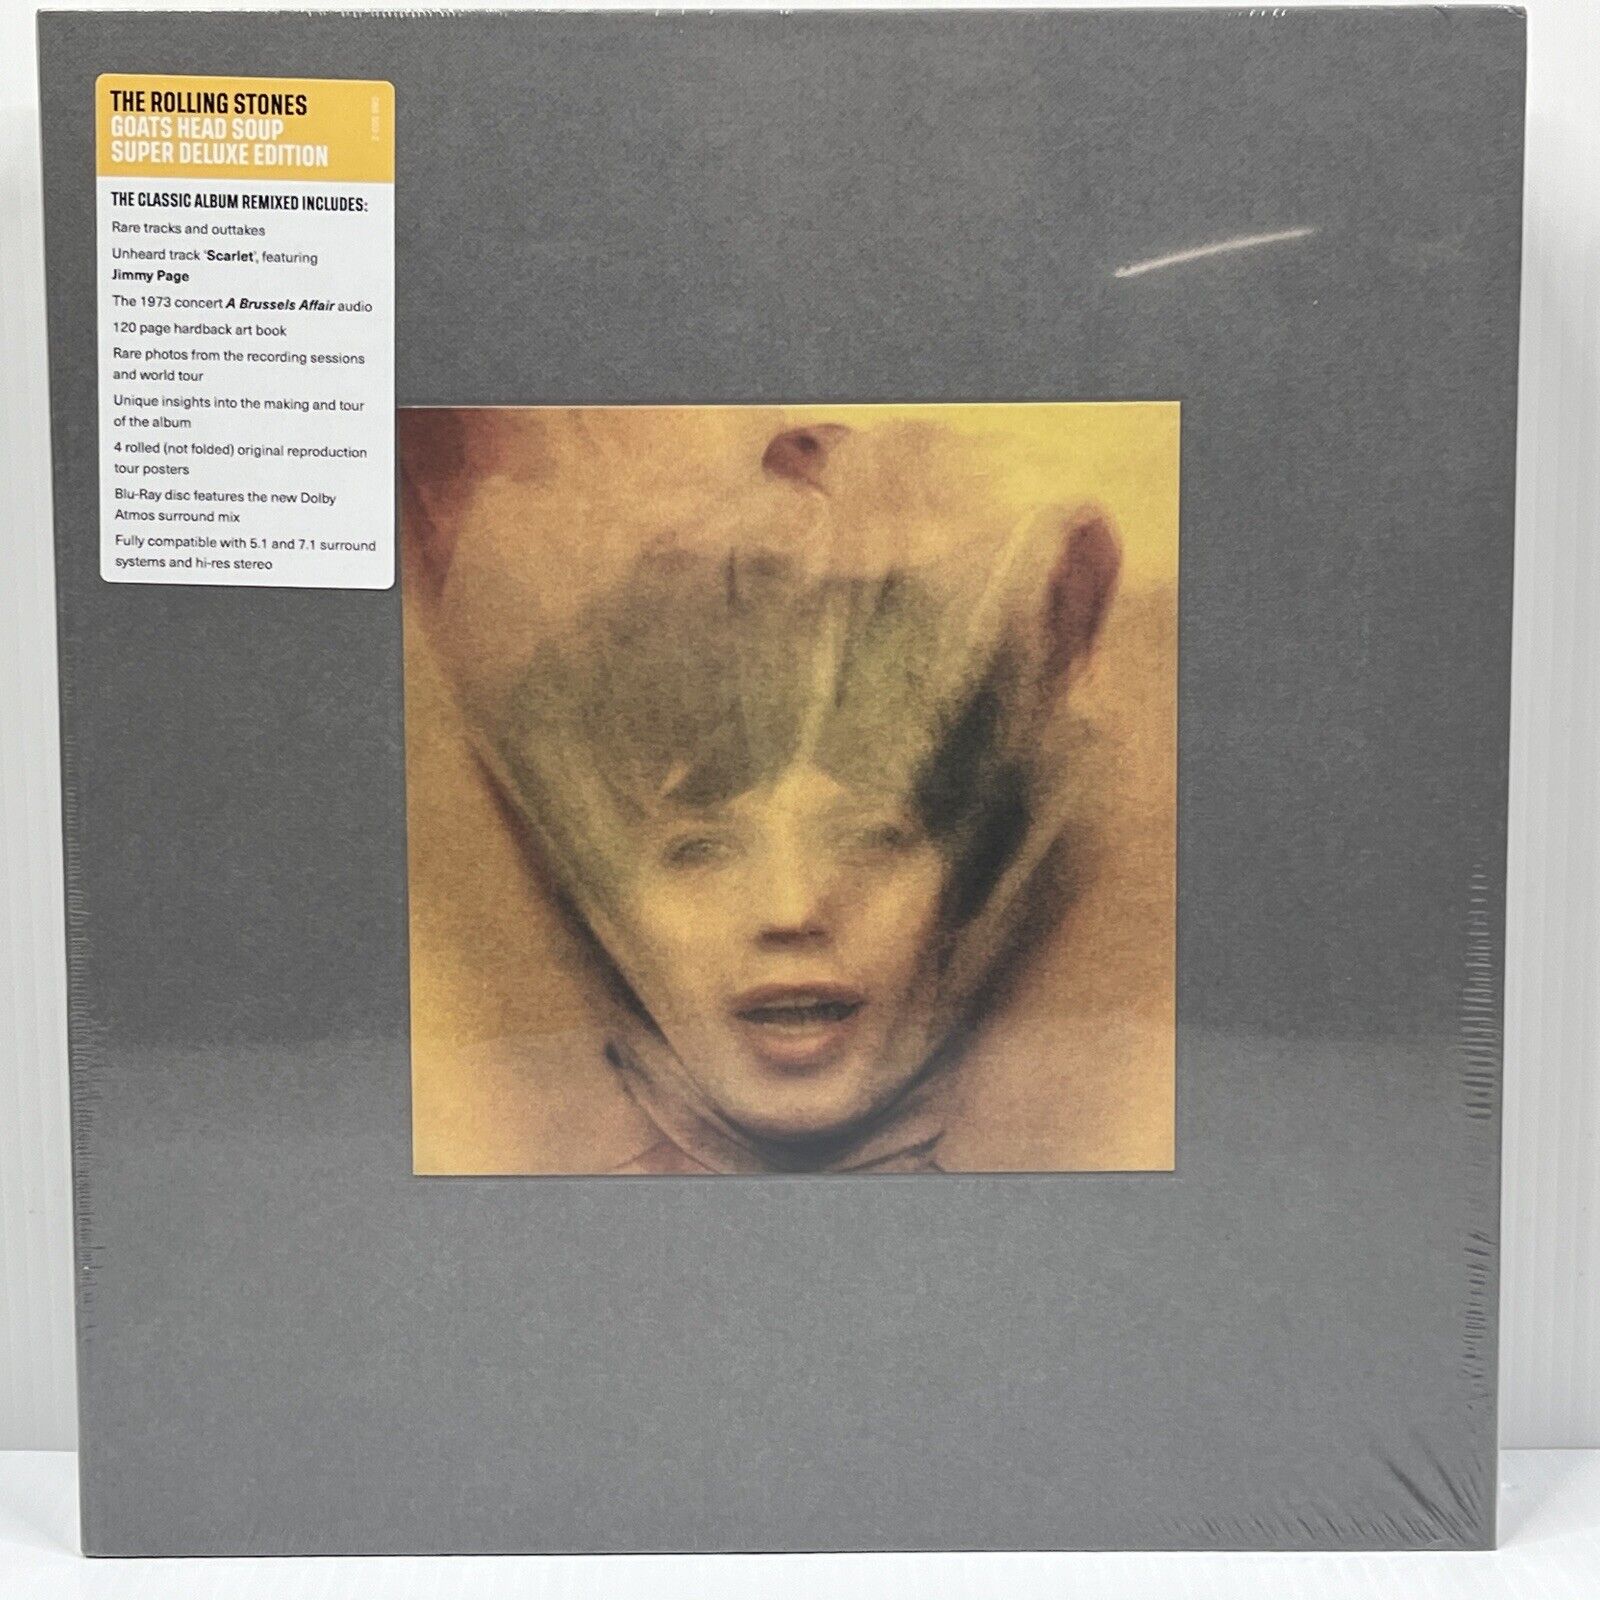 Goats Head Soup [3CD/Blu-ray Super Deluxe Box Set] by The Rolling Stones NEW